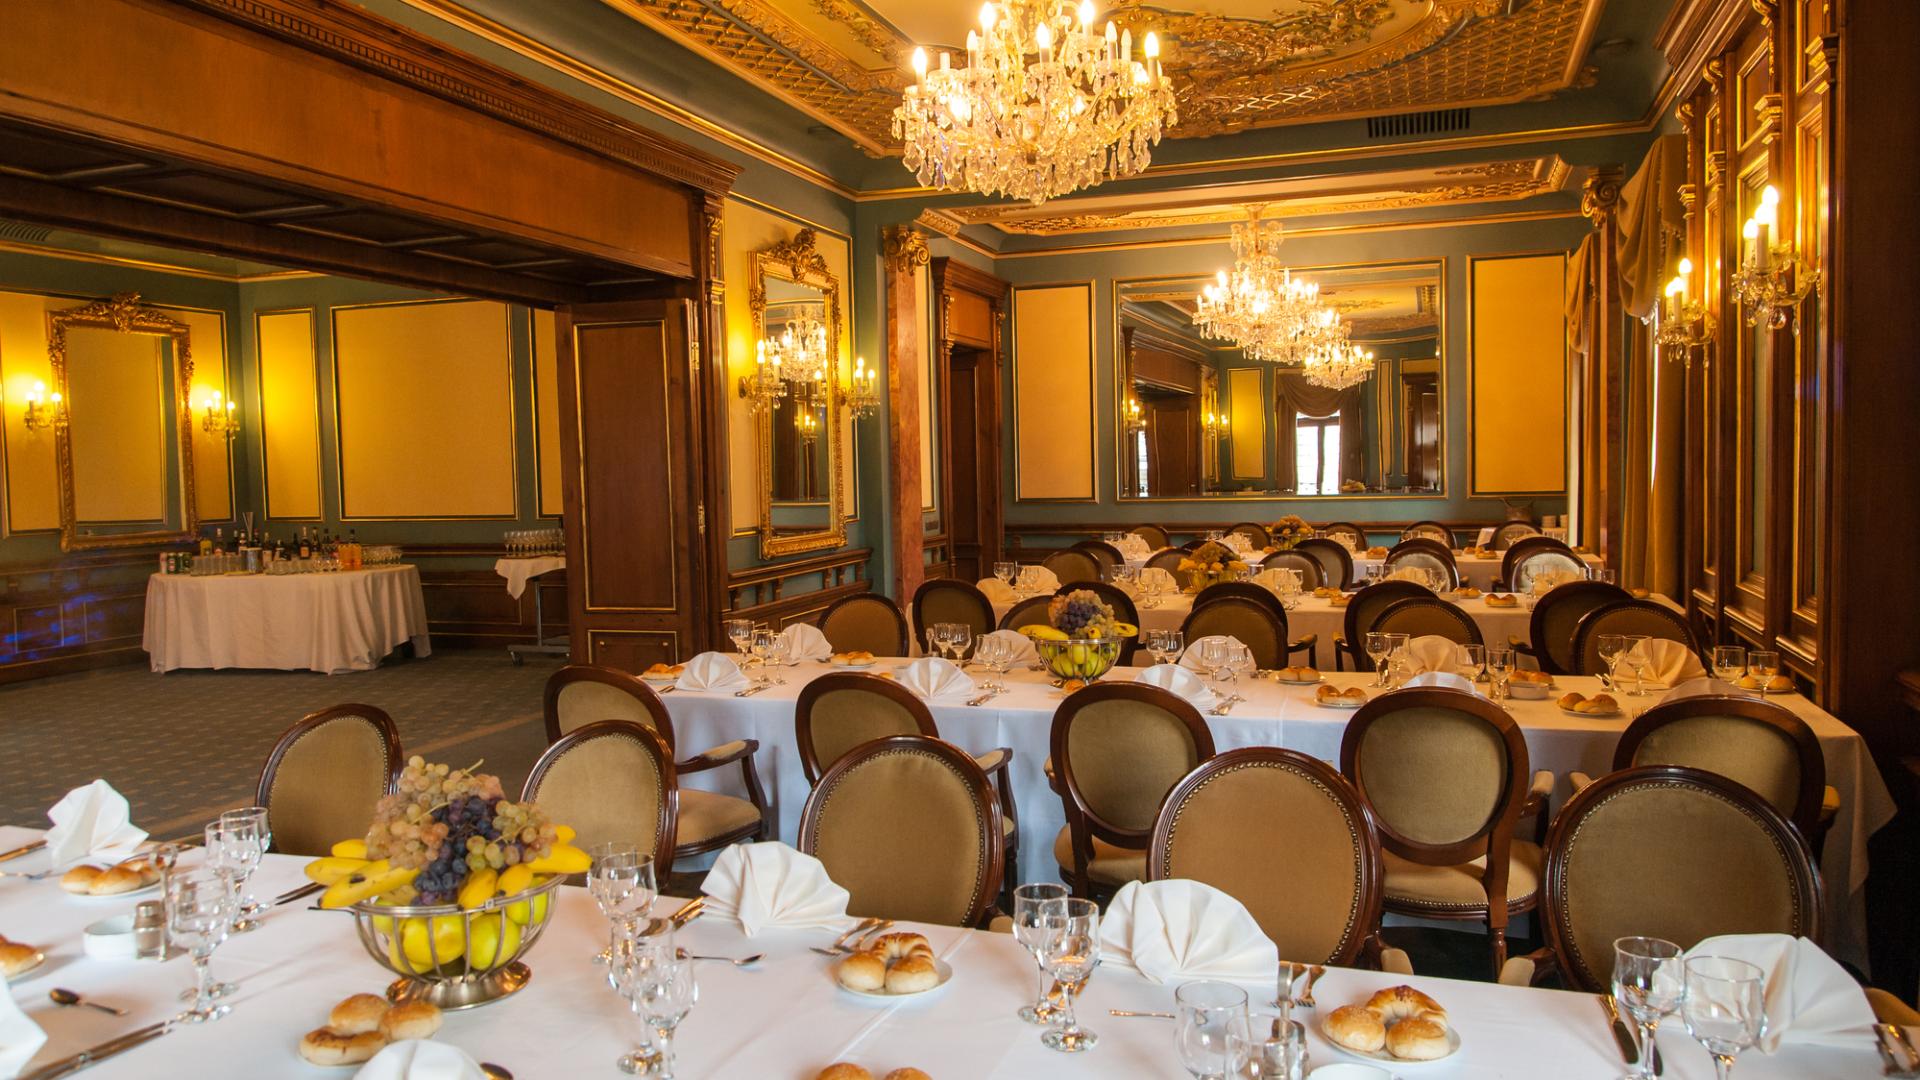 Cheap Banquet Halls for Rent in Chicago, IL